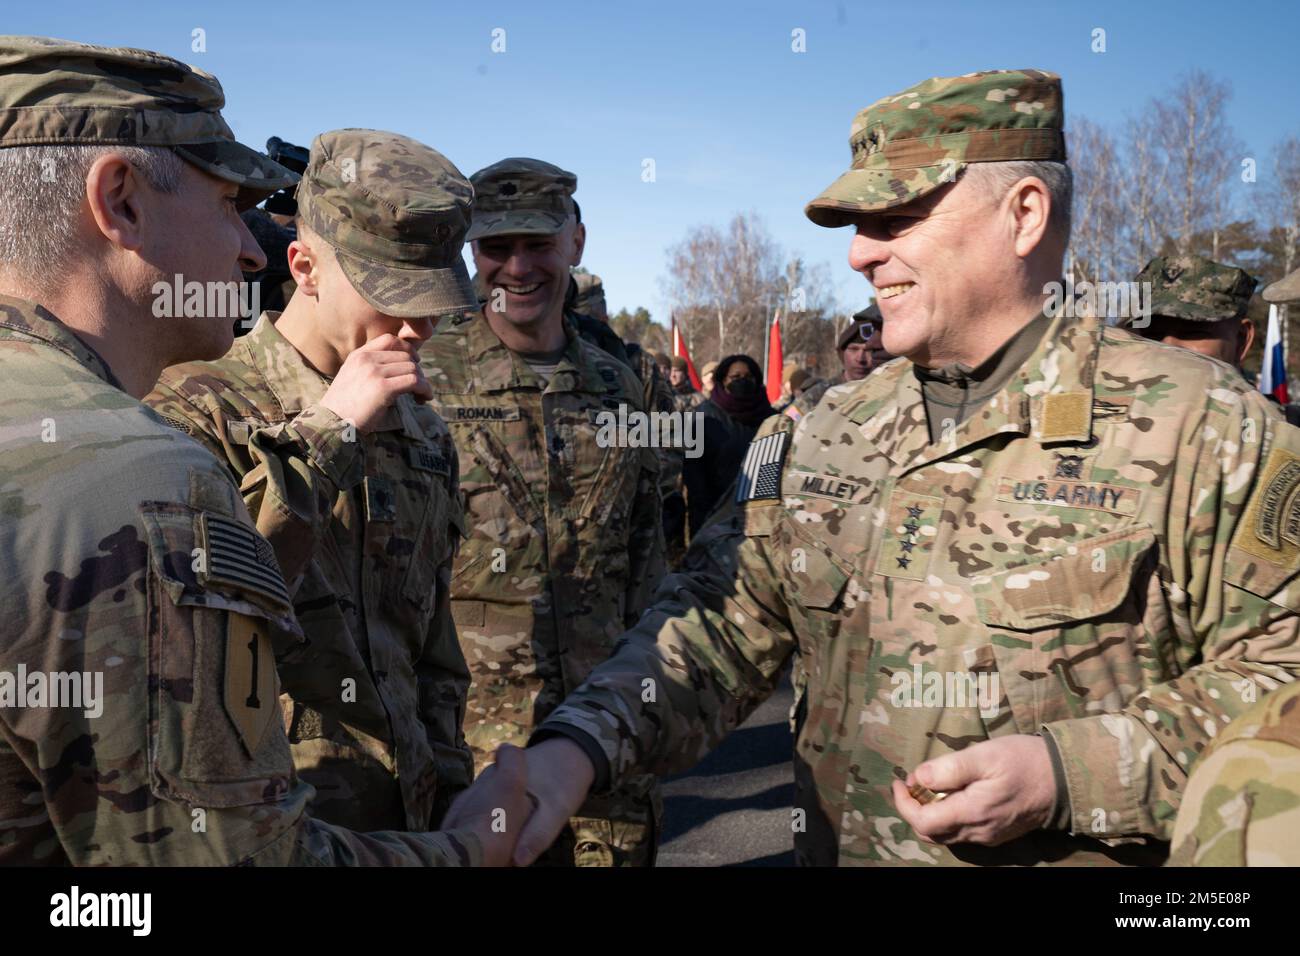 U.S. Army Gen. Mark A. Milley (right), Chairman of the Joint Chiefs of Staff, prepares to hand a coin to Command Sgt. Maj. Robert N. Christensen, command sergeant major of 1-3rd Attack Battalion, 12th Combat Aviation Brigade at Camp Adazi, Latvia, on March 5, 2022. Milley, the highest-ranking U.S. military leader, was joined by United States Ambassador to Latvia John Carwile, Latvian Lt. General Leonīds Kalniņš, Chief of Defense, and Gen. Christopher G. Cavoli, Commanding General of U.S. Army Europe and Africa, for the visit to U.S. and Latvian soldiers. Milley said that recent U.S. troop depl Stock Photo